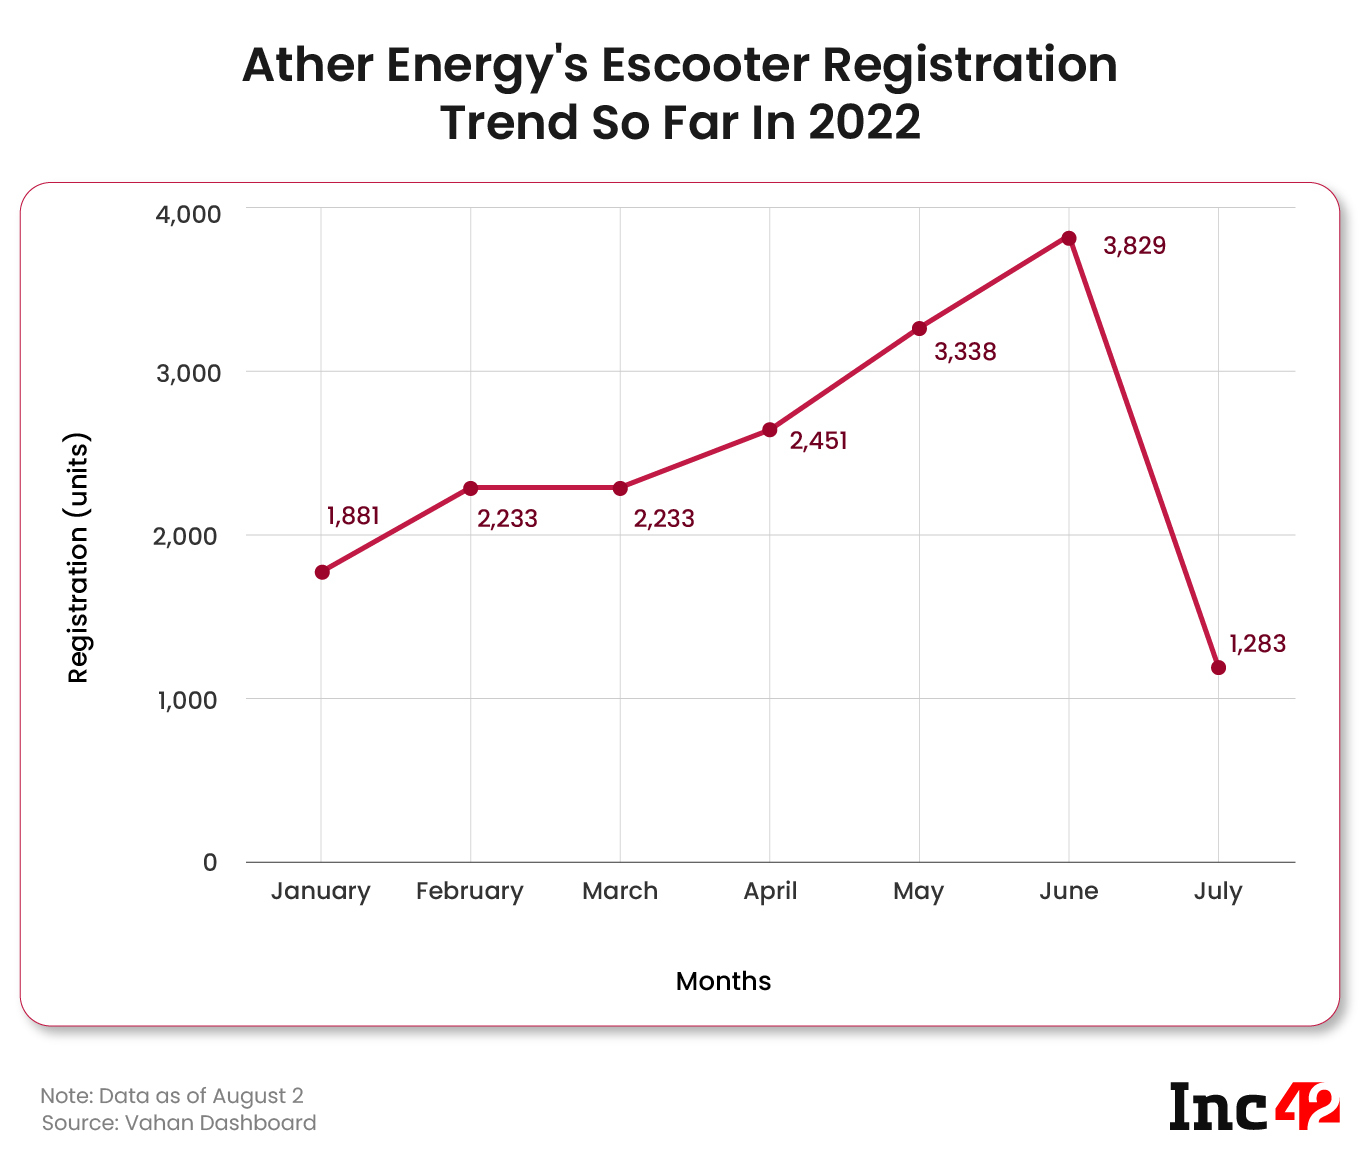 Ather Energy's Escooter Registration Trend So Far In 2022